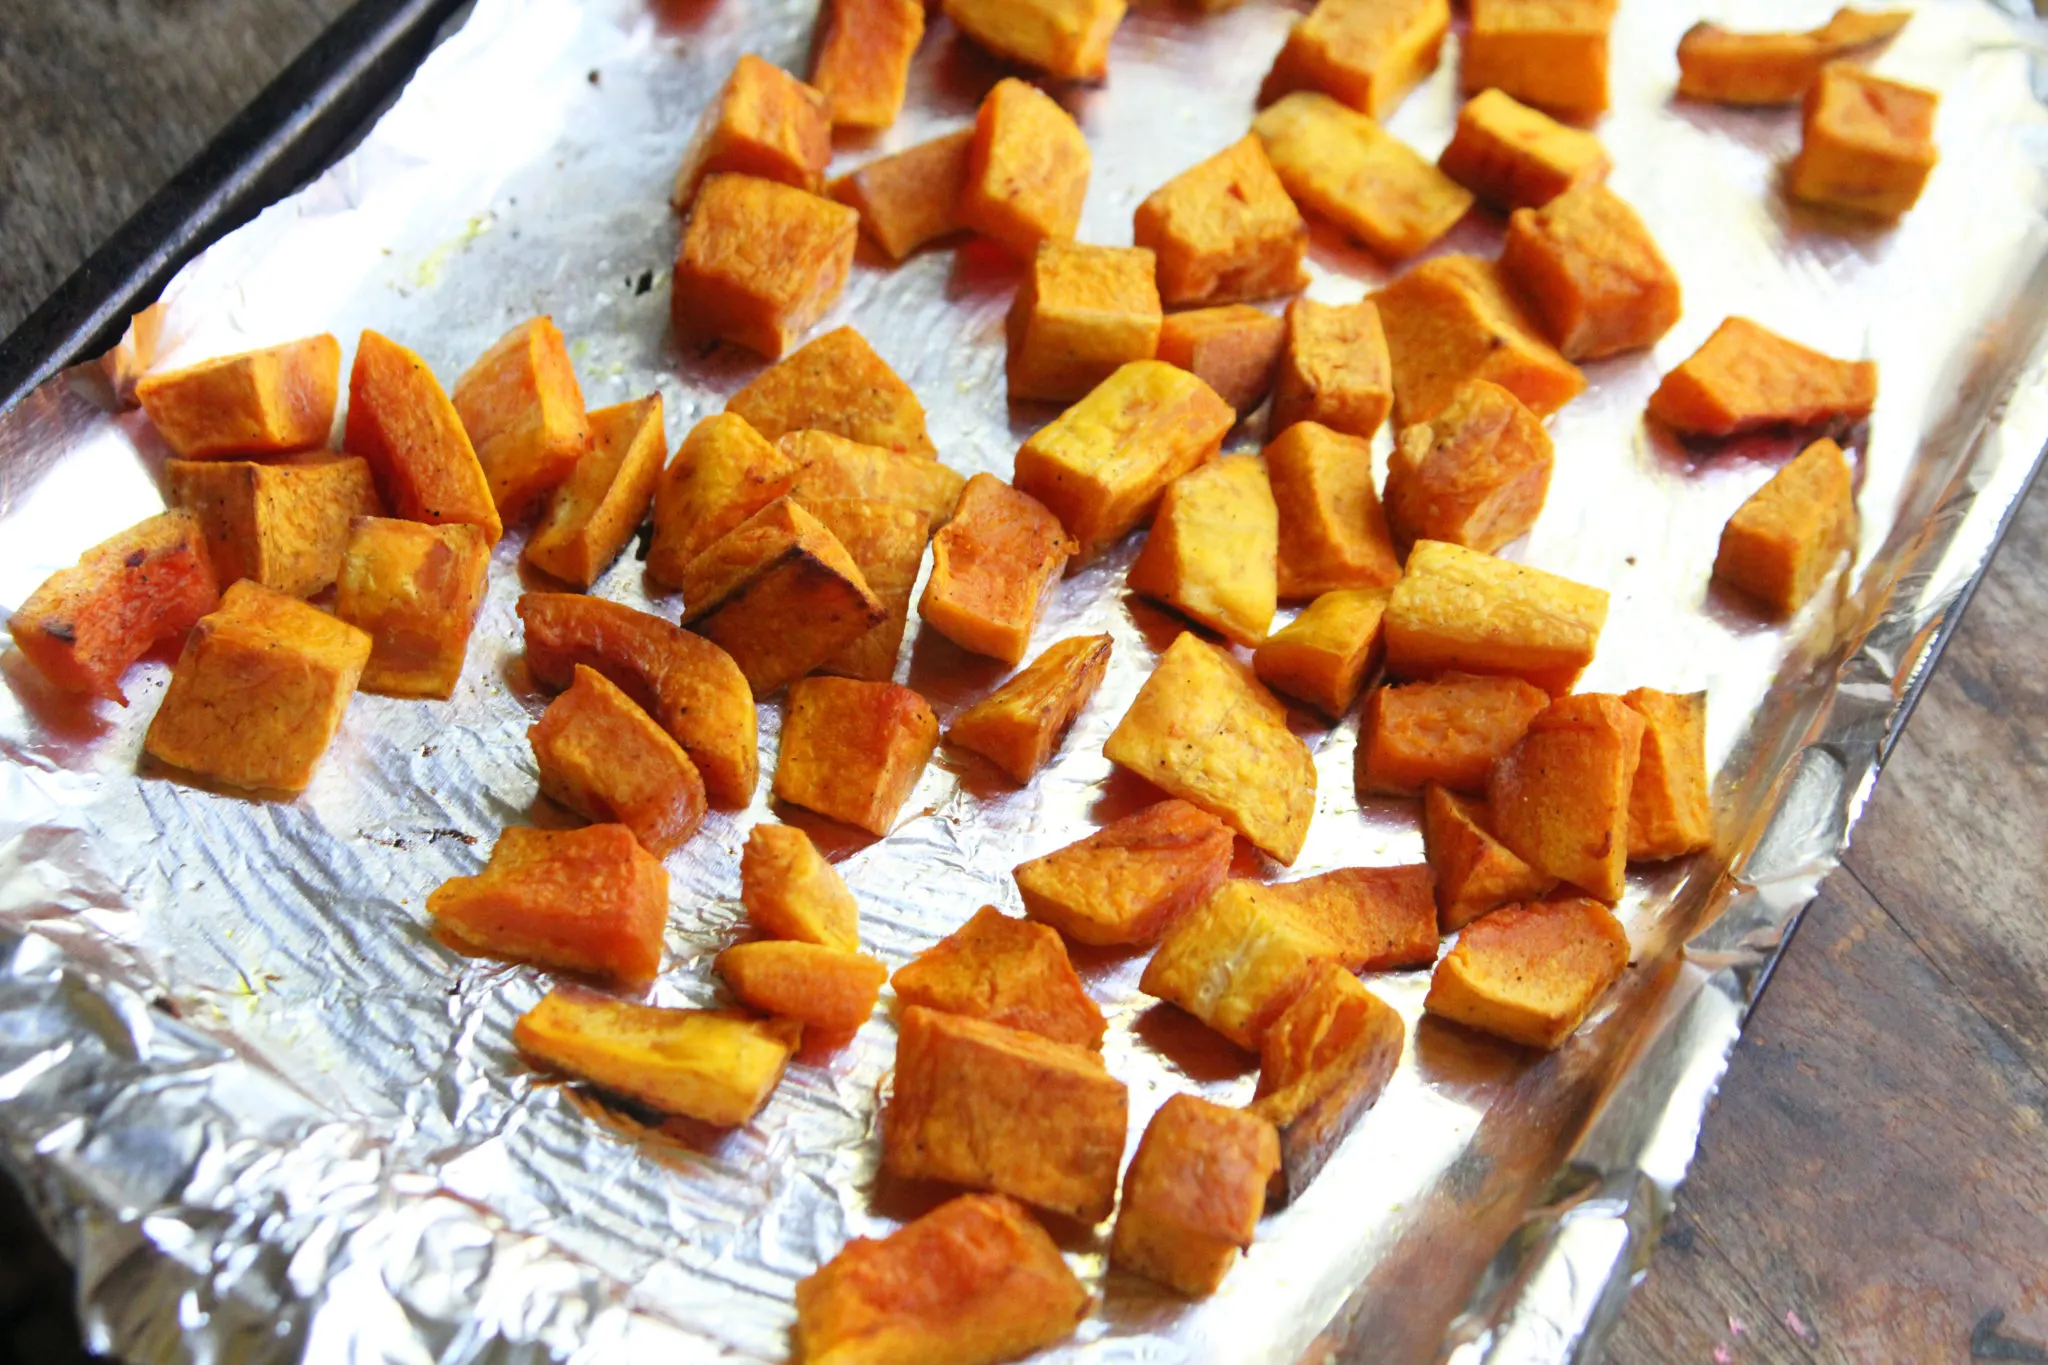 How to Roast Butternut Squash Cubed